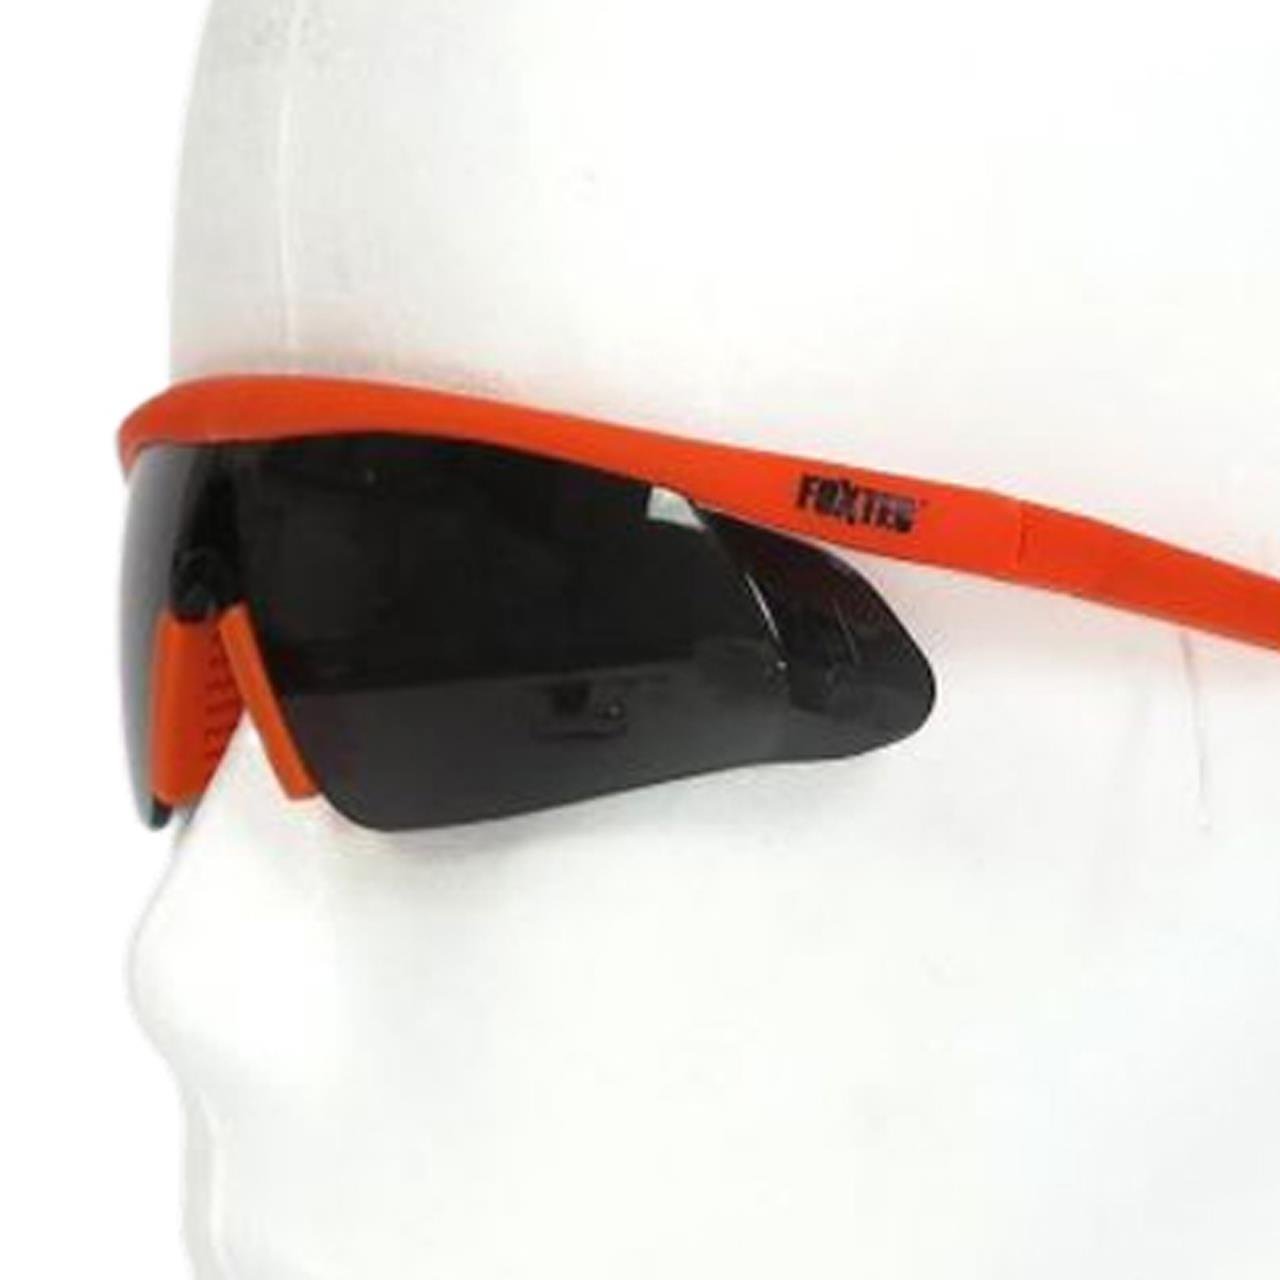 FUXTEC tinted safety glasses/goggles